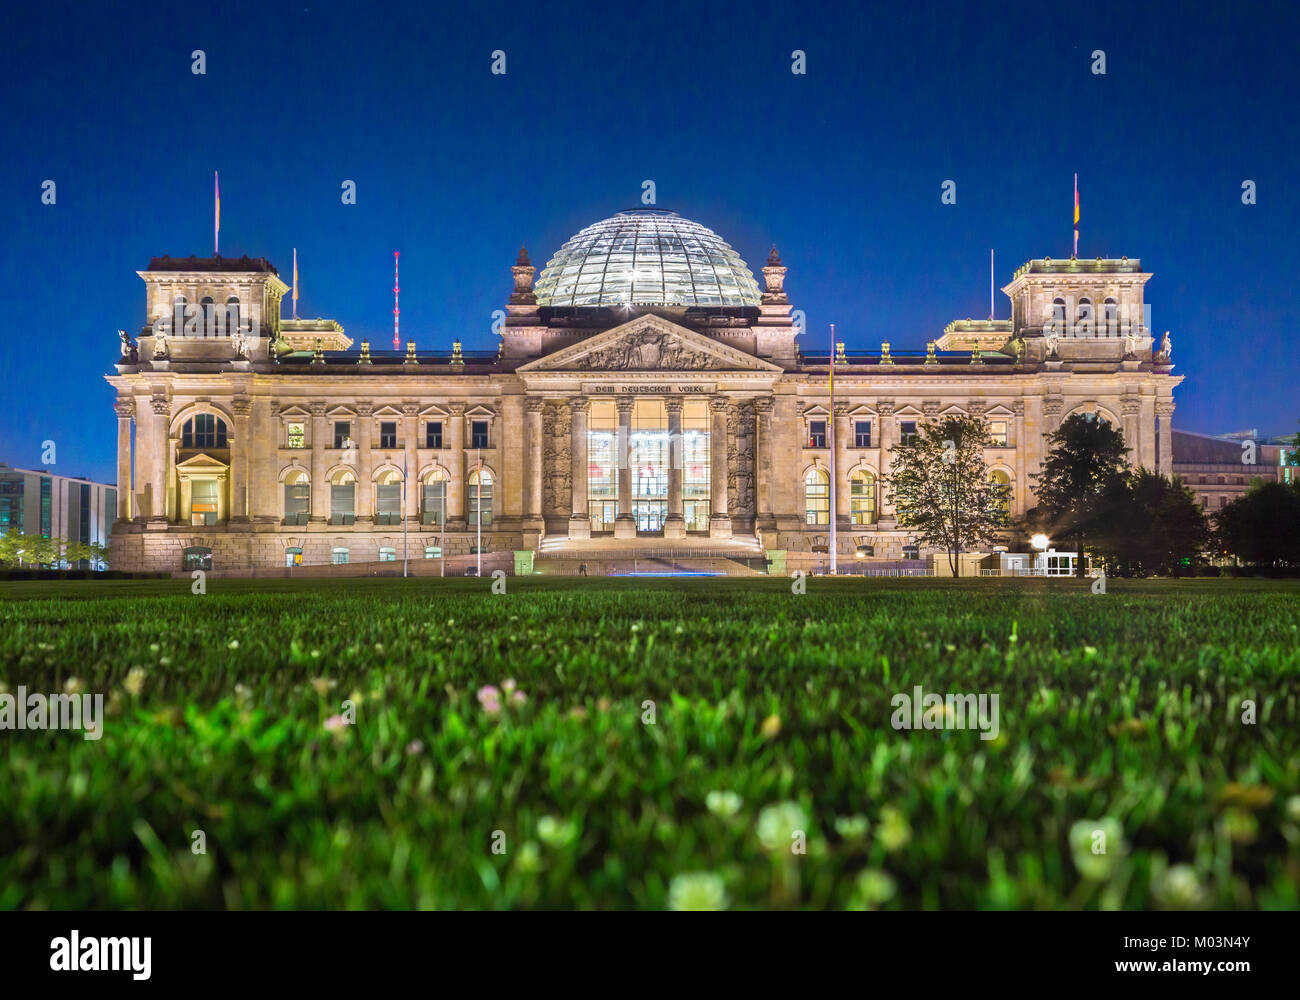 Panoramic view of famous Reichstag building, seat of the German Parliament (Deutscher Bundestag), in twilight during blue hour at dusk, Berlin, German Stock Photo